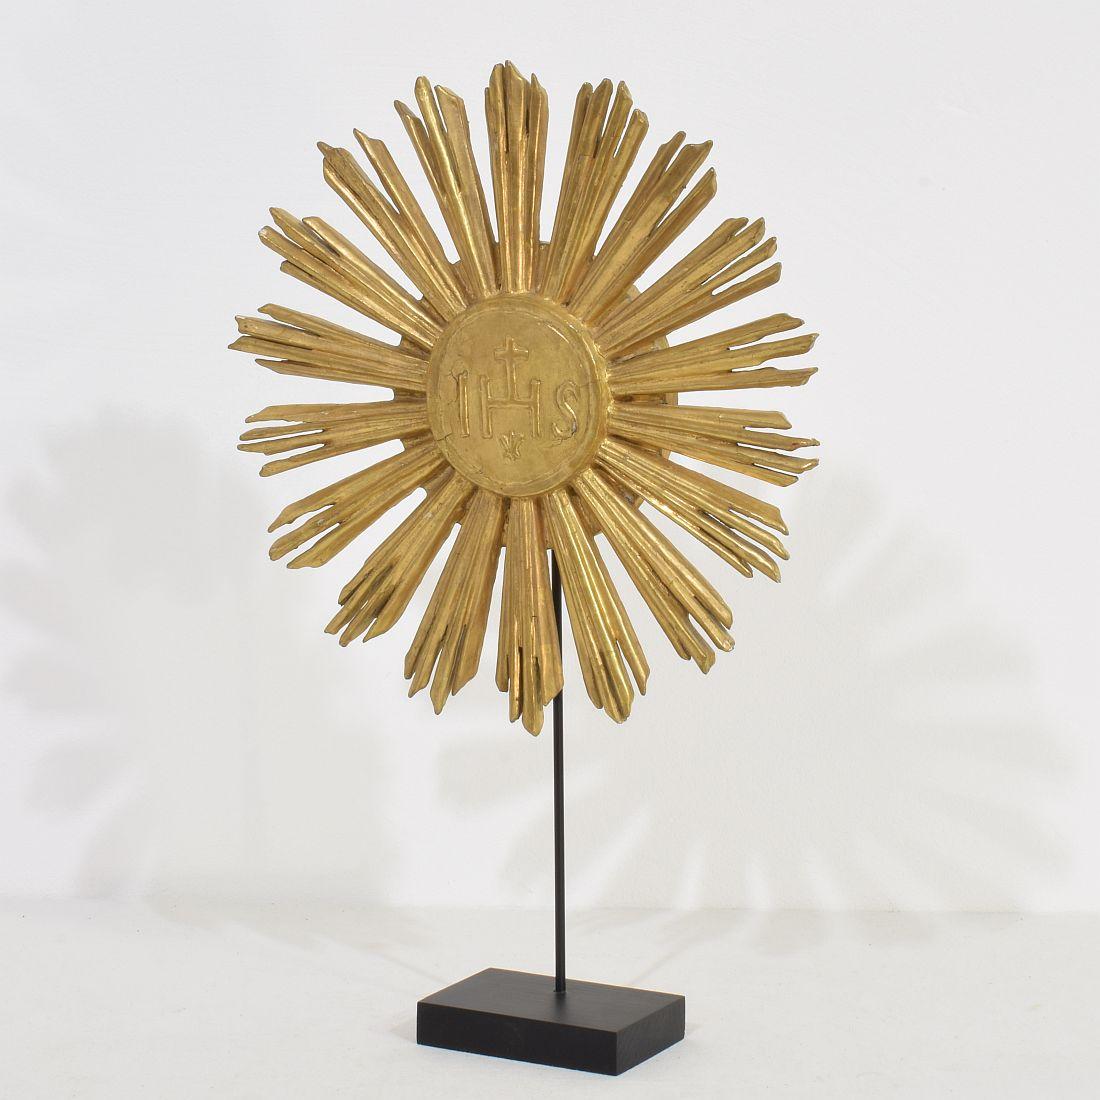 Beautiful weathered one of a kind piece. Giltwood baroque sun, Italy, circa 1750.
Weathered.
Measurement includes the wooden base.